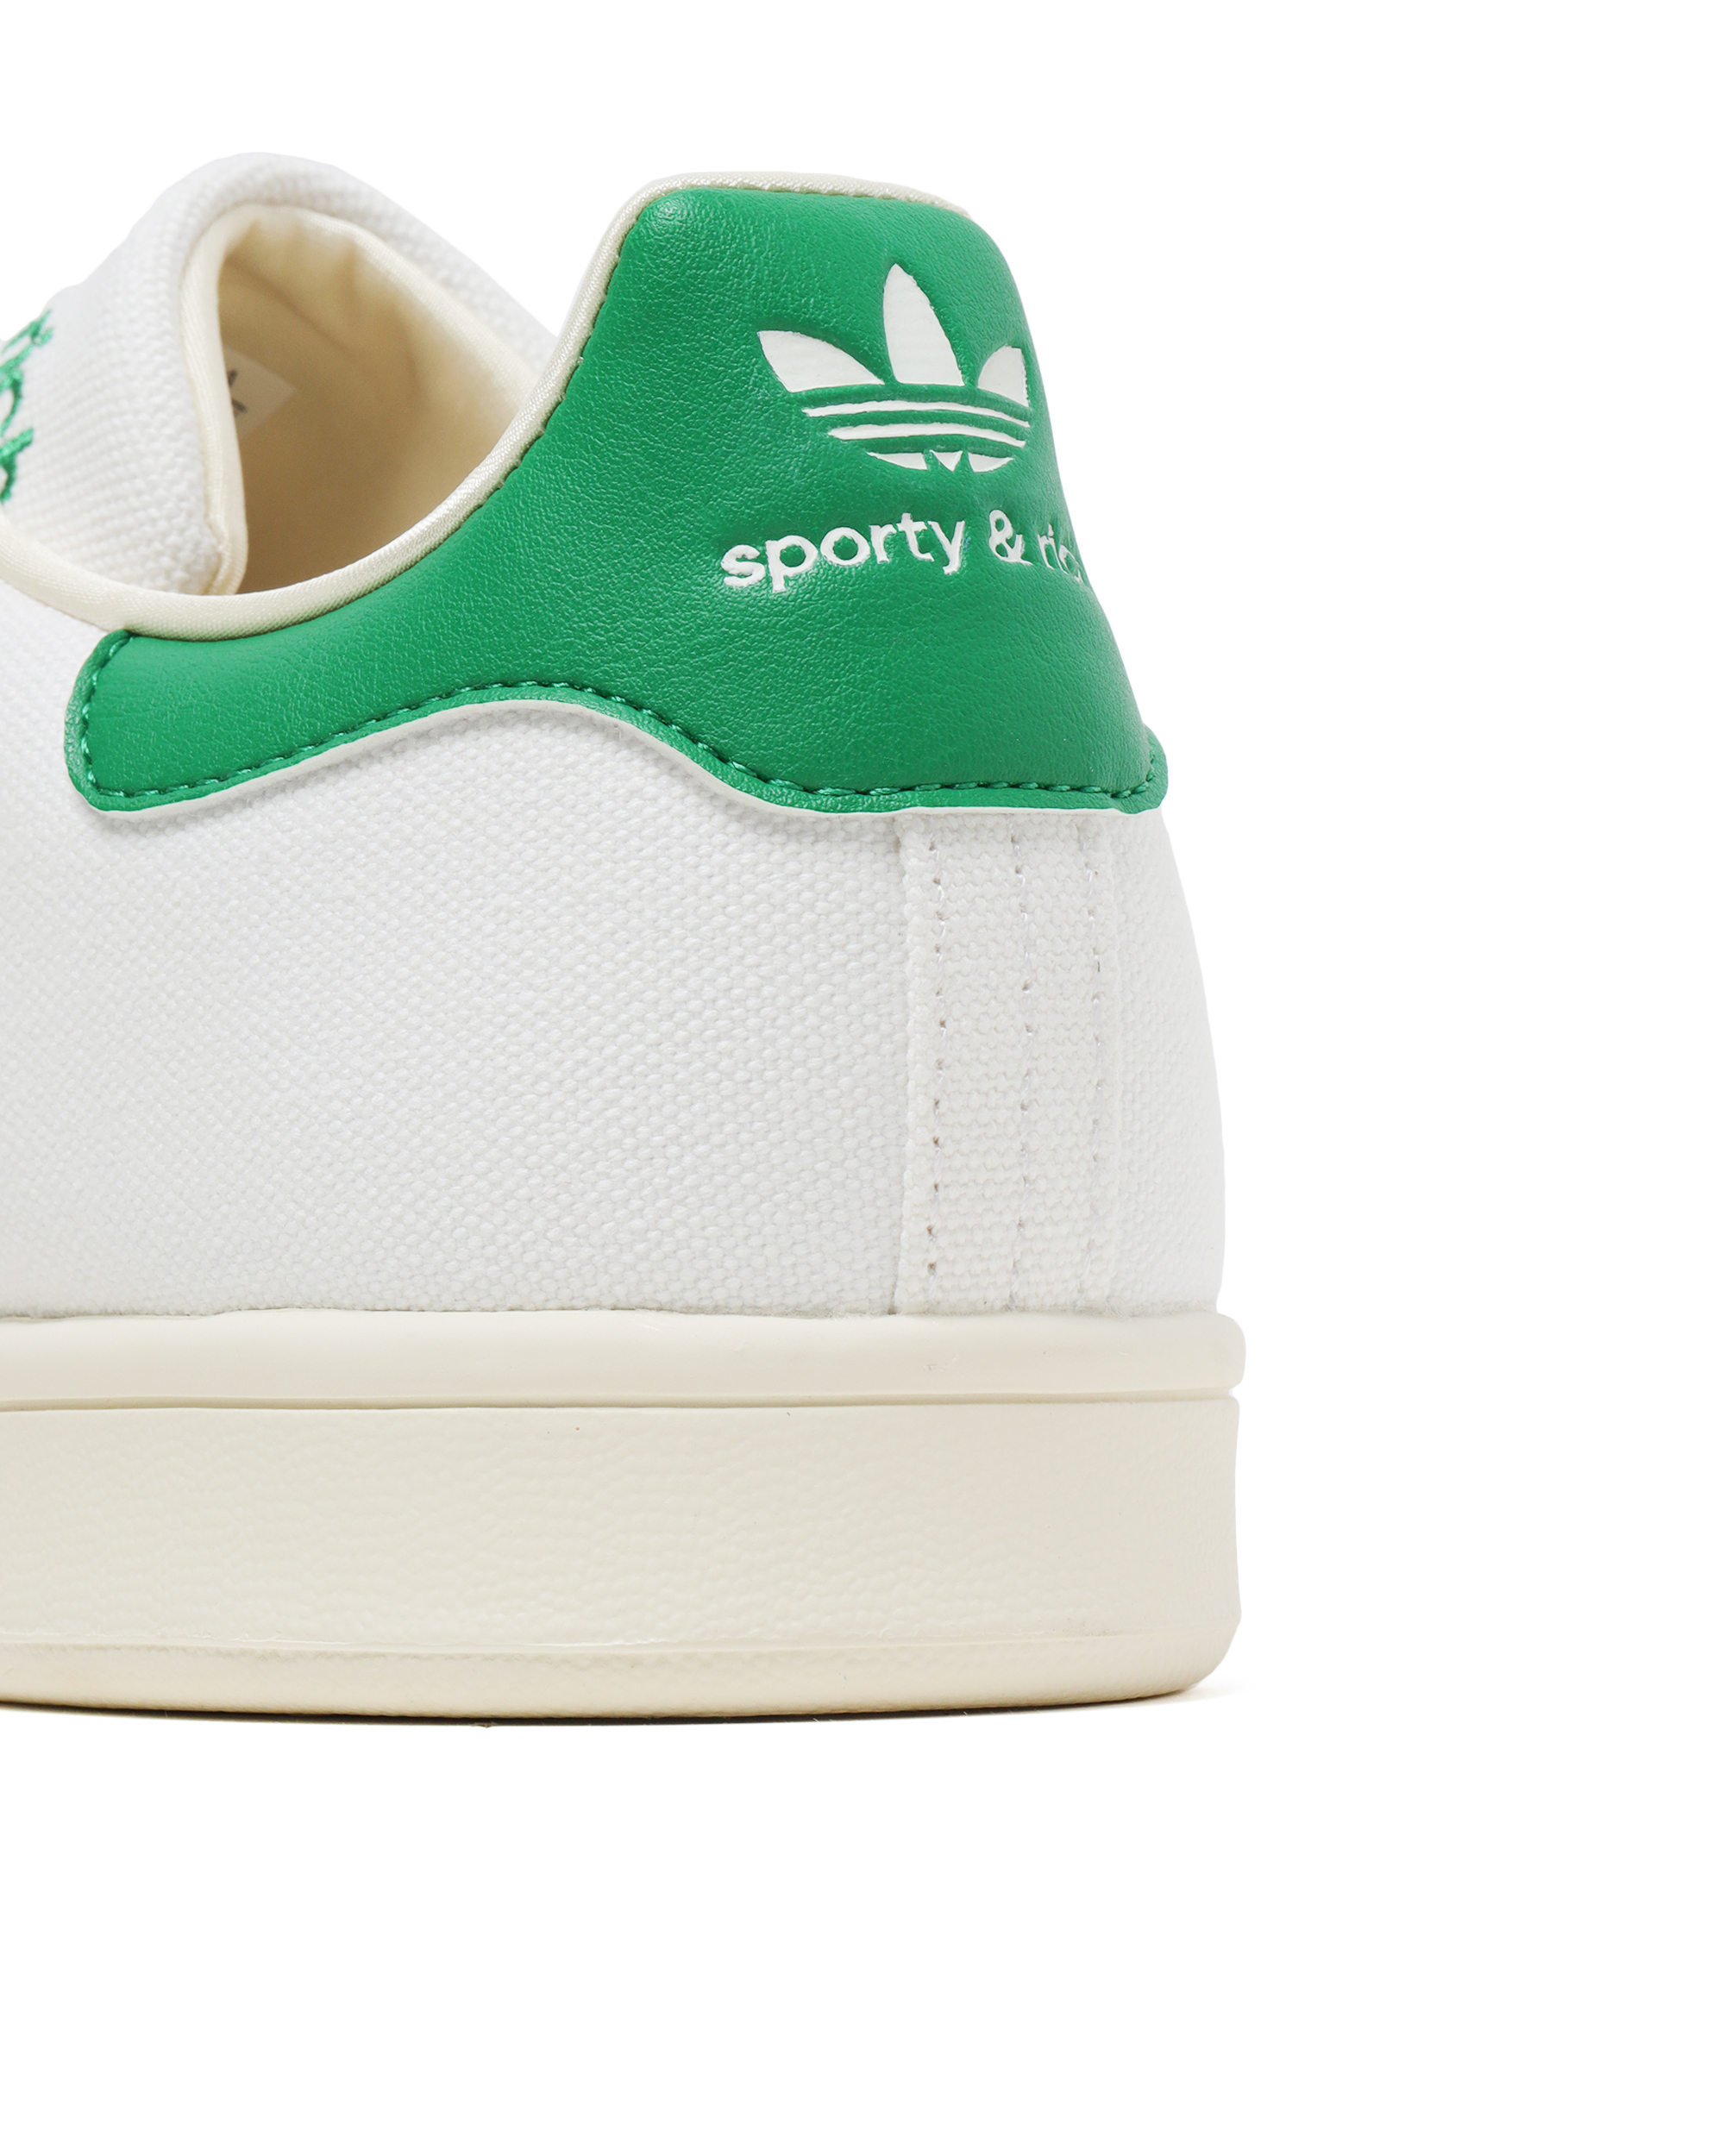 ADIDAS X Sporty & Rich Stan Smith low-top sneakers | ITeSHOP